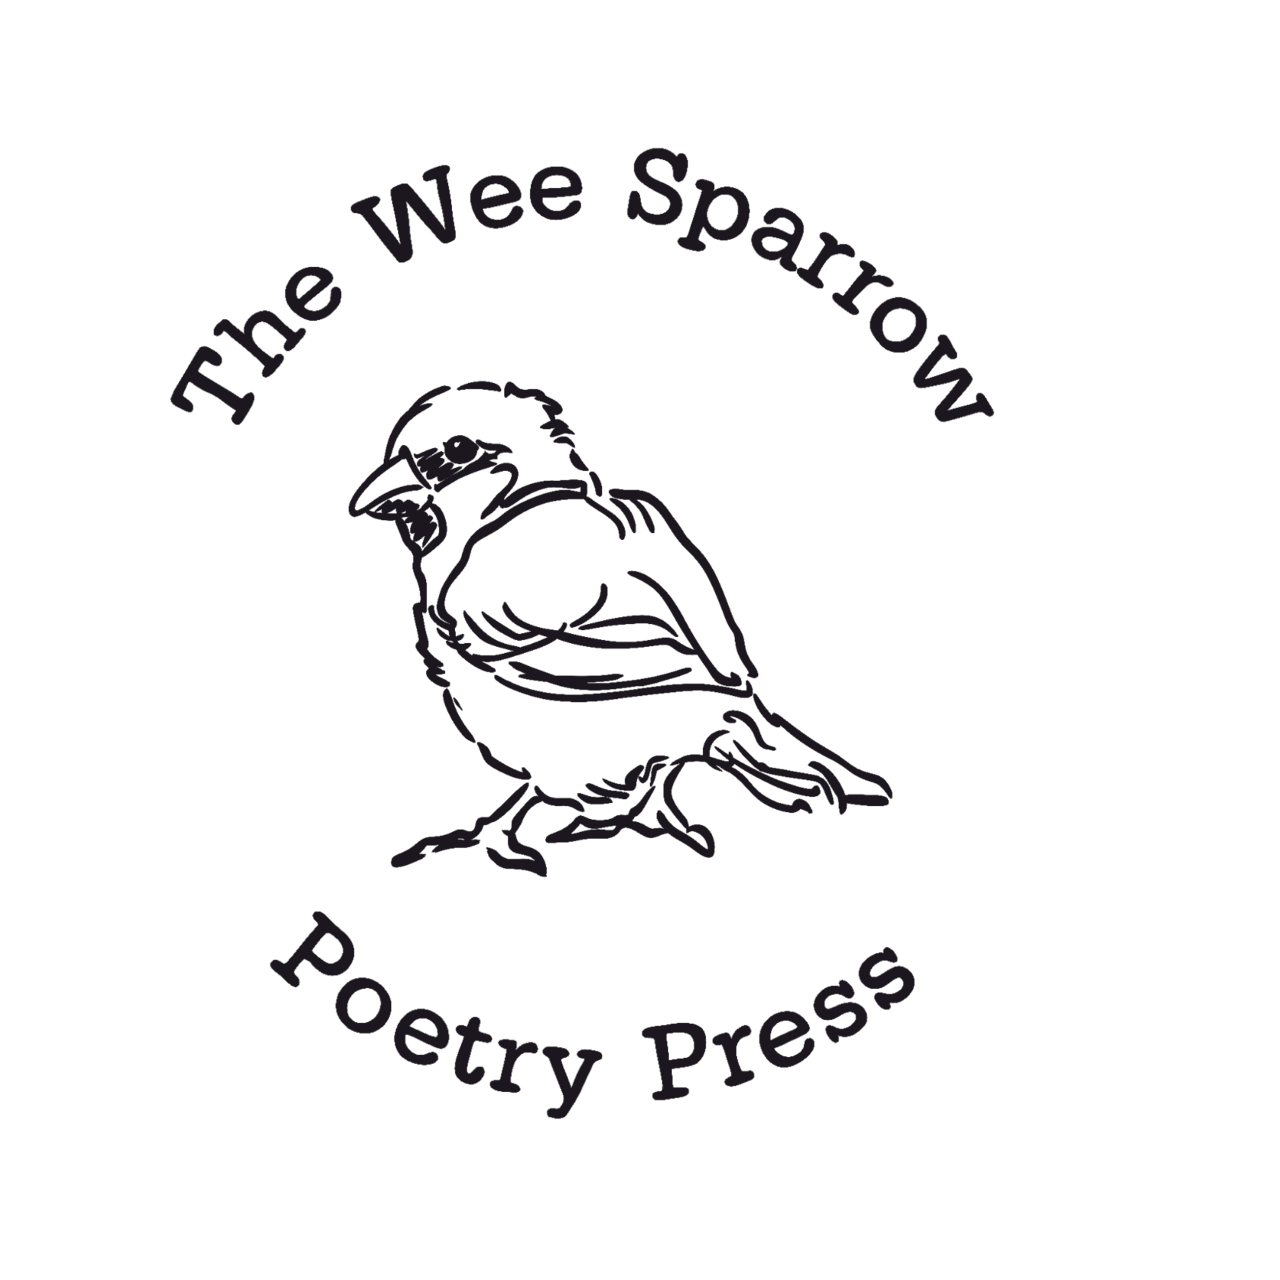 Artwork for The Wee Sparrow Poetry Press Newsletter